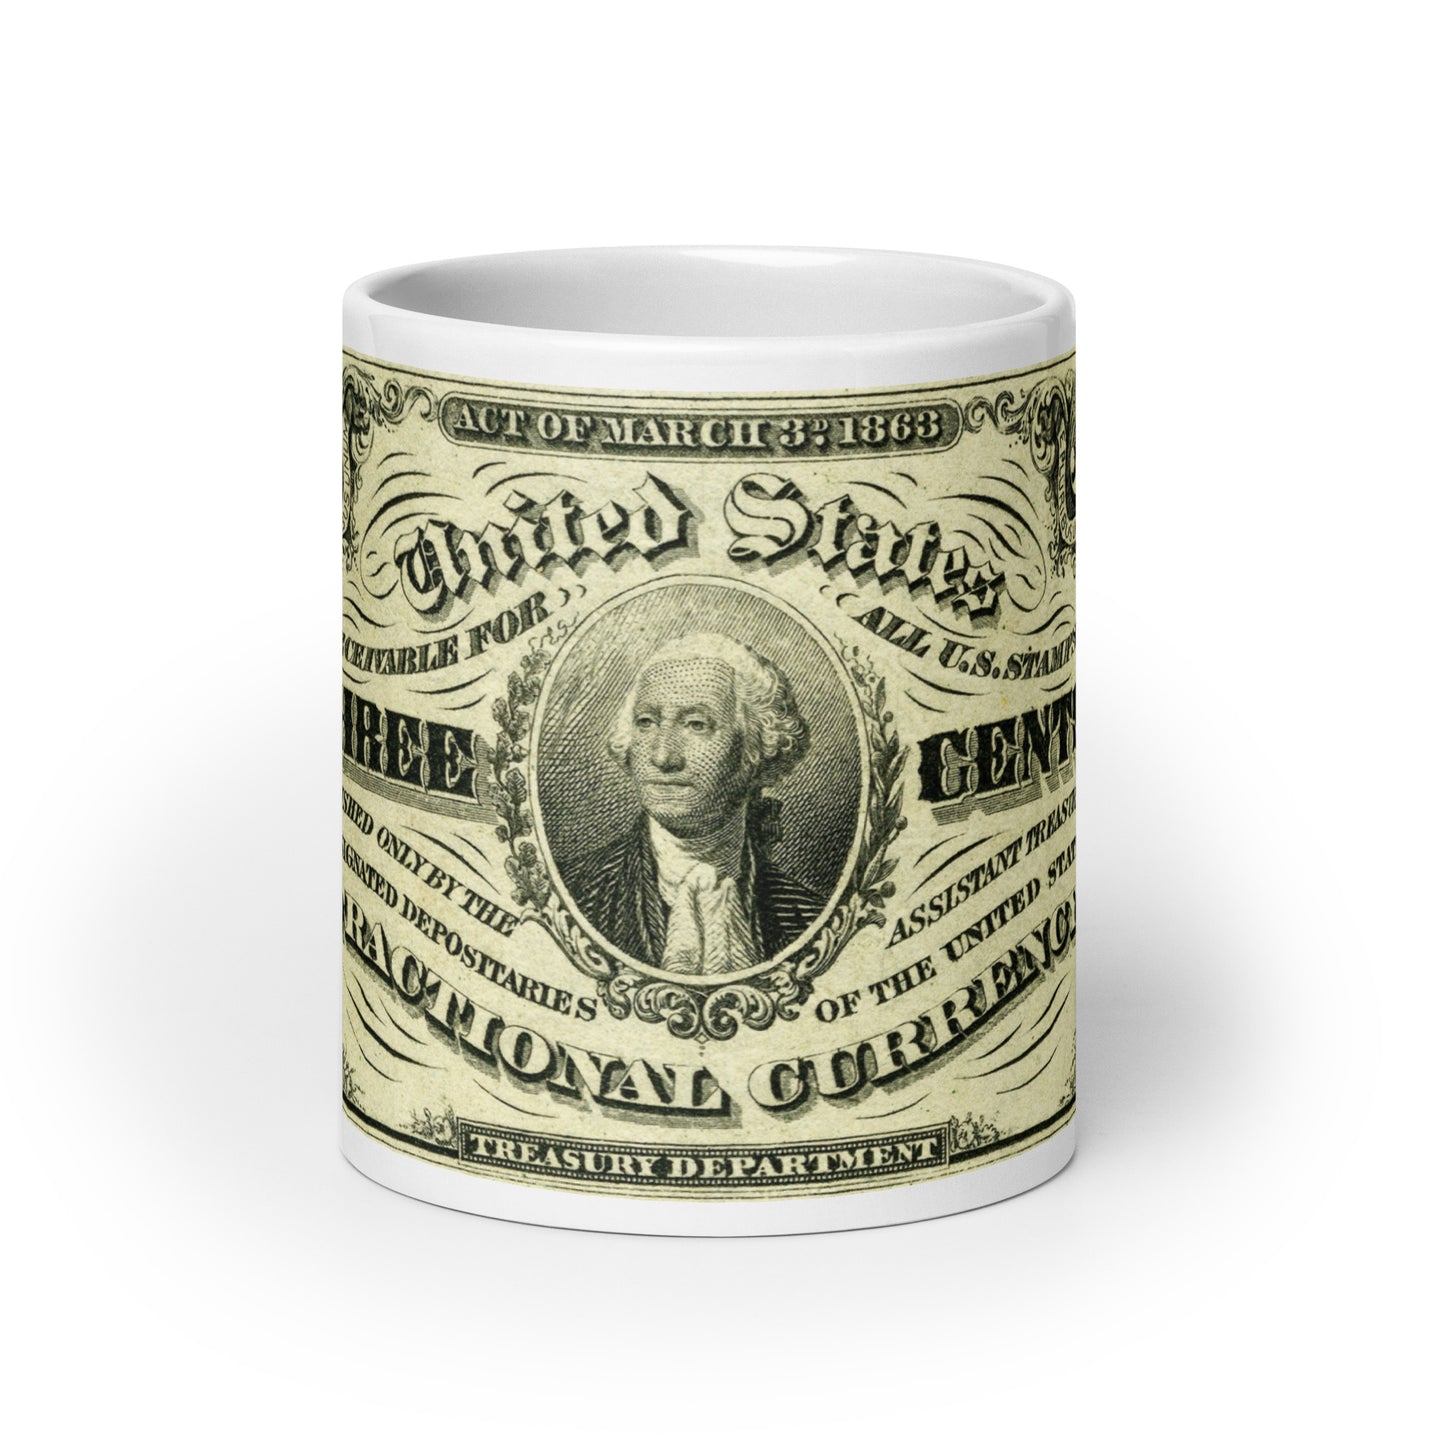 3 Cents 3RD Issue Fractional Currency Edition - Classic Currency Collector's Mug